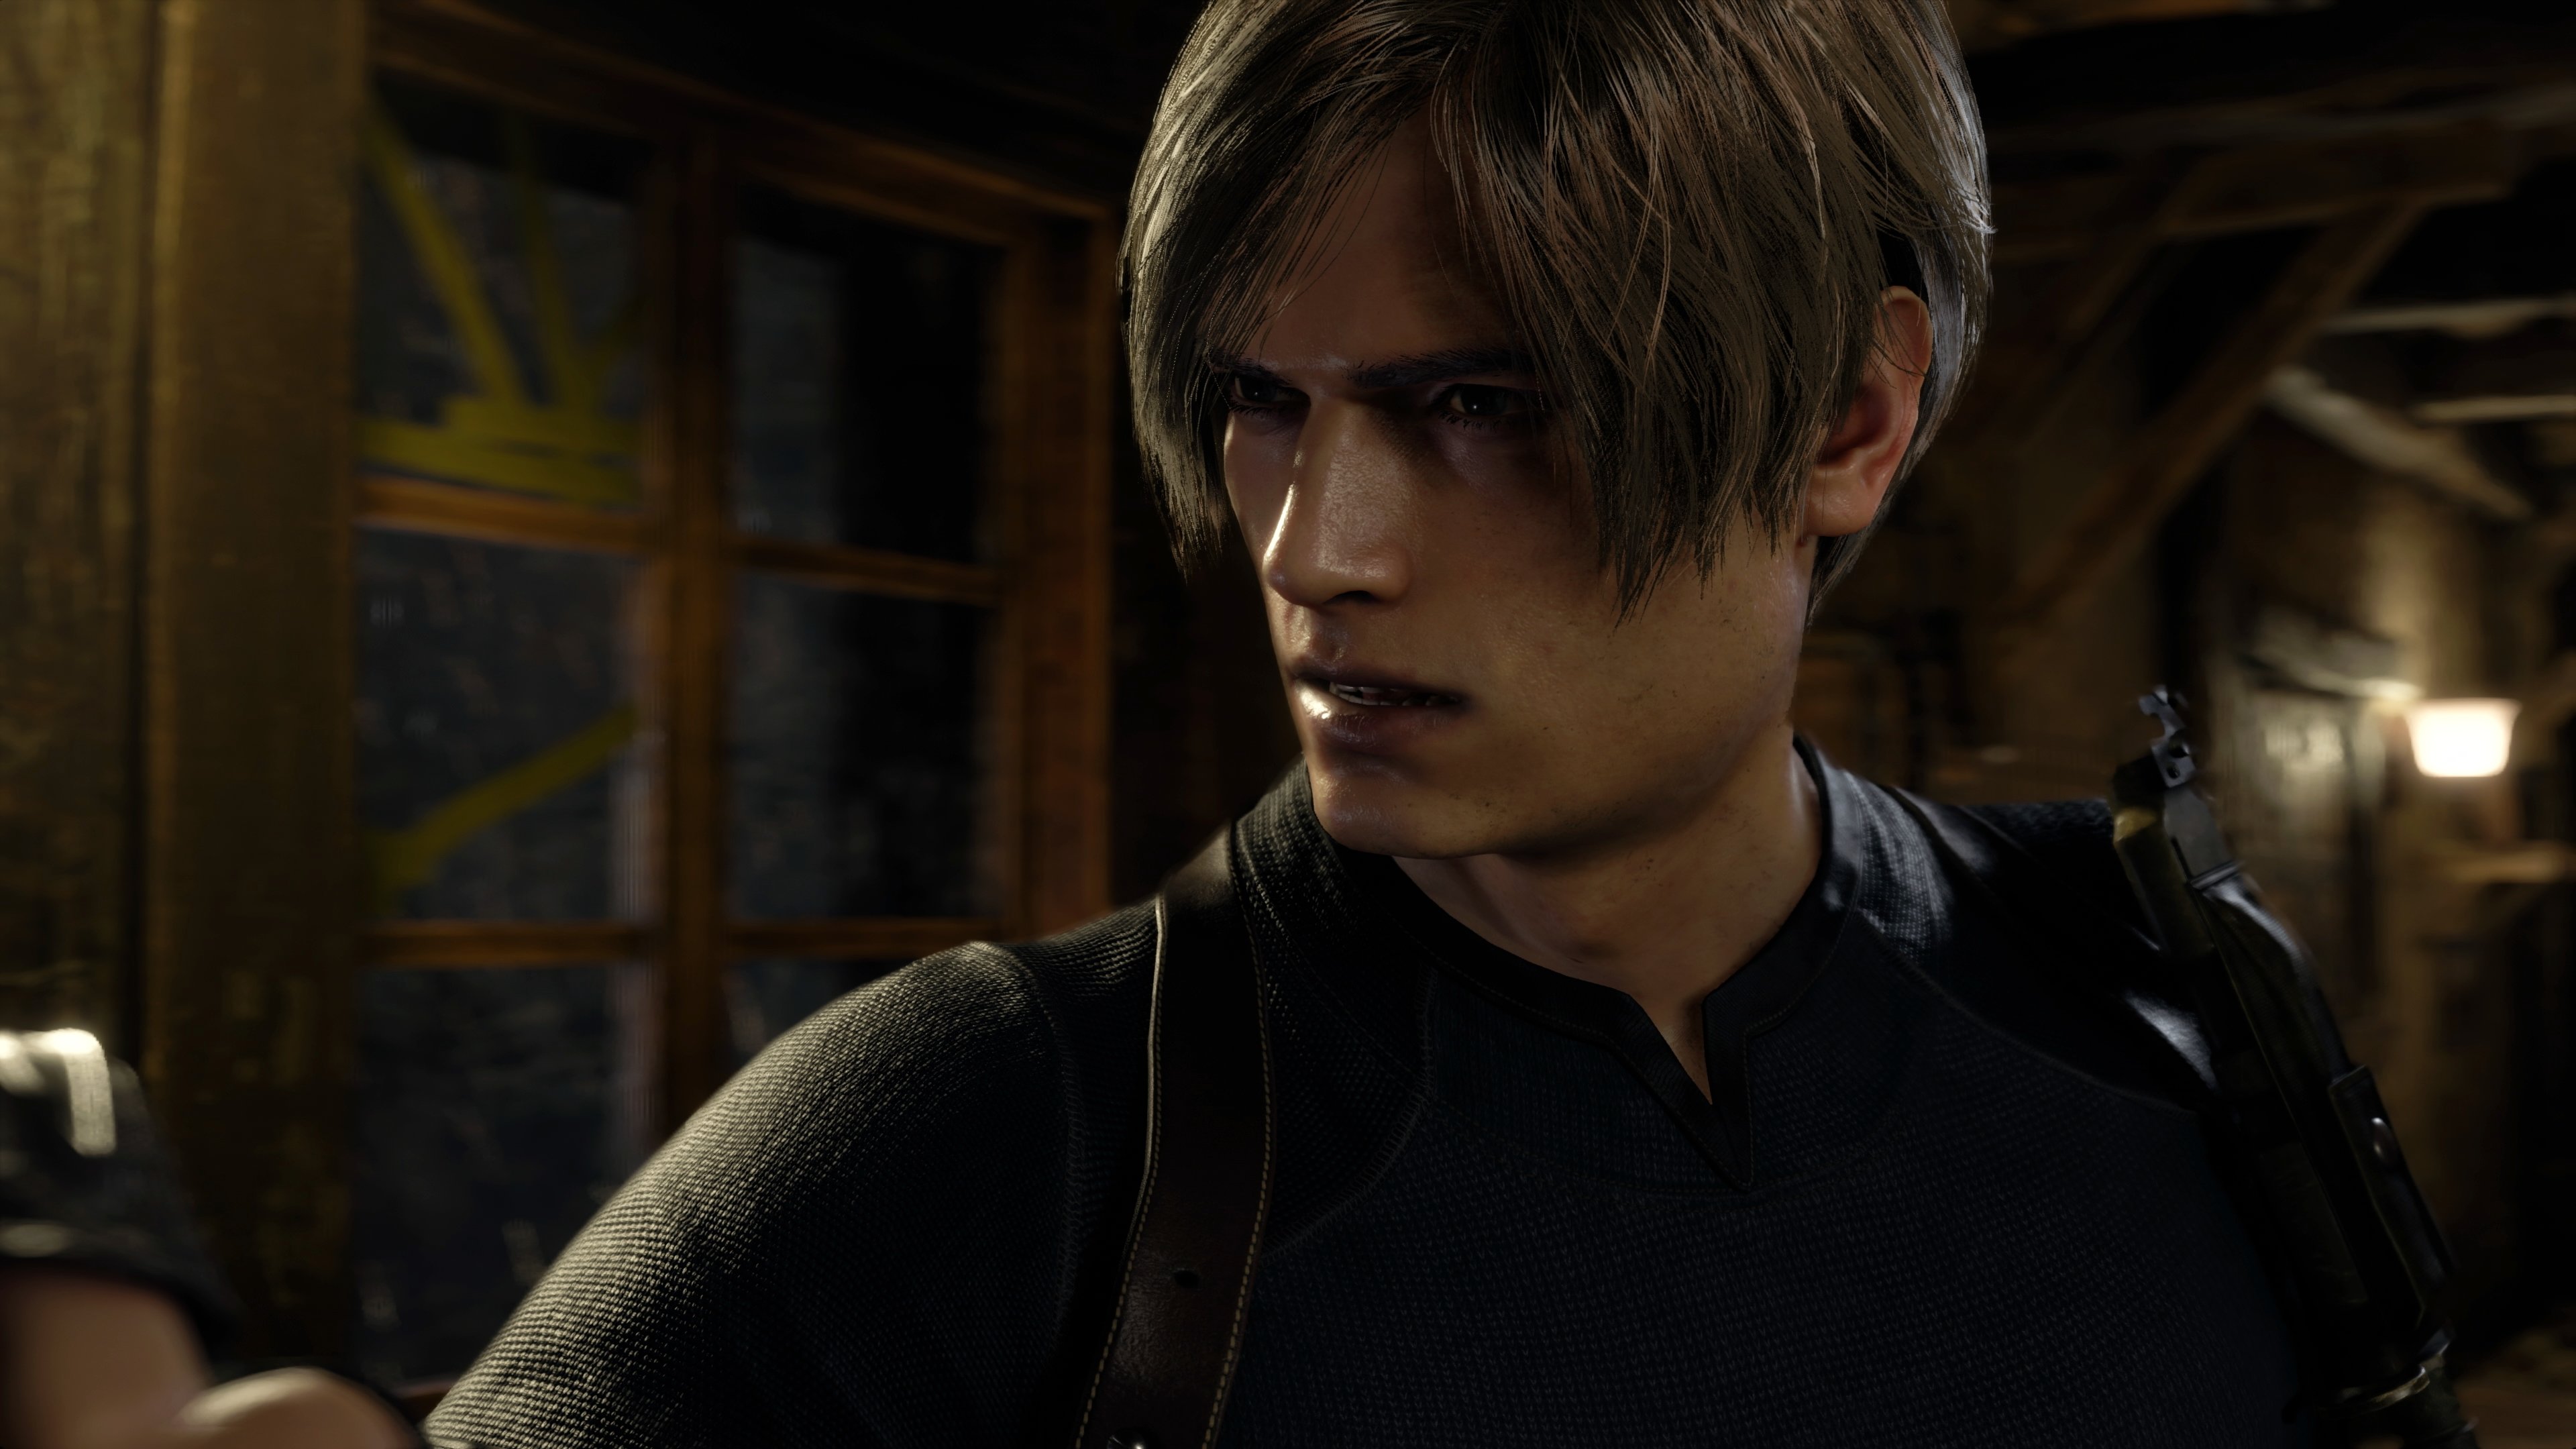 Resident Evil 4 Remake official announced - Release date, PSVR2, and more